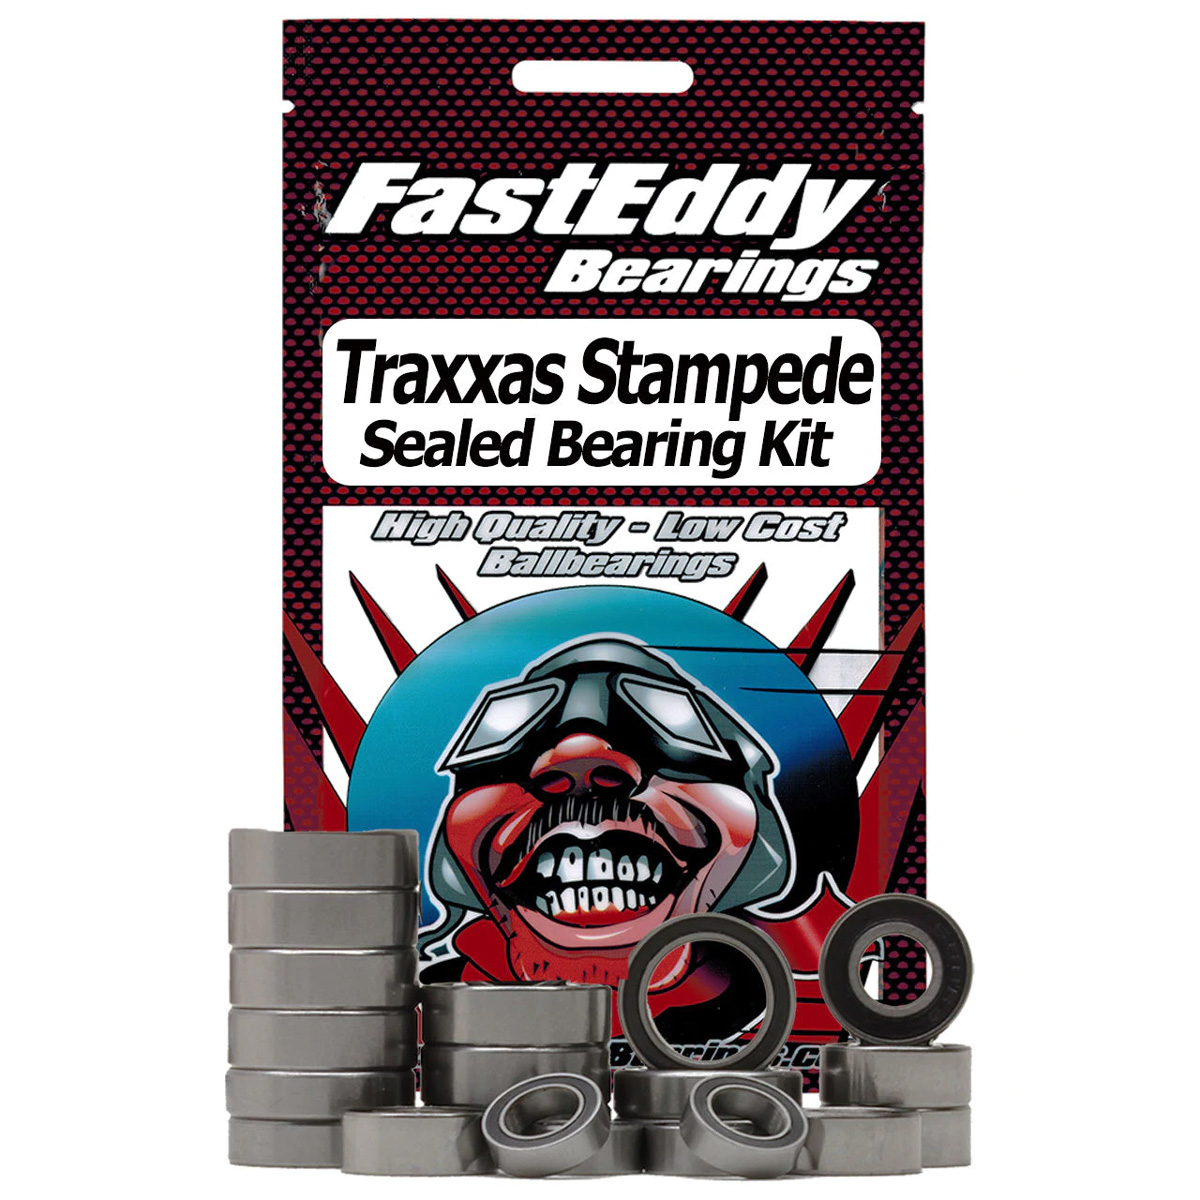 TFE1170 Traxxas Stampede Sealed Bearing Kit -  FastEddy